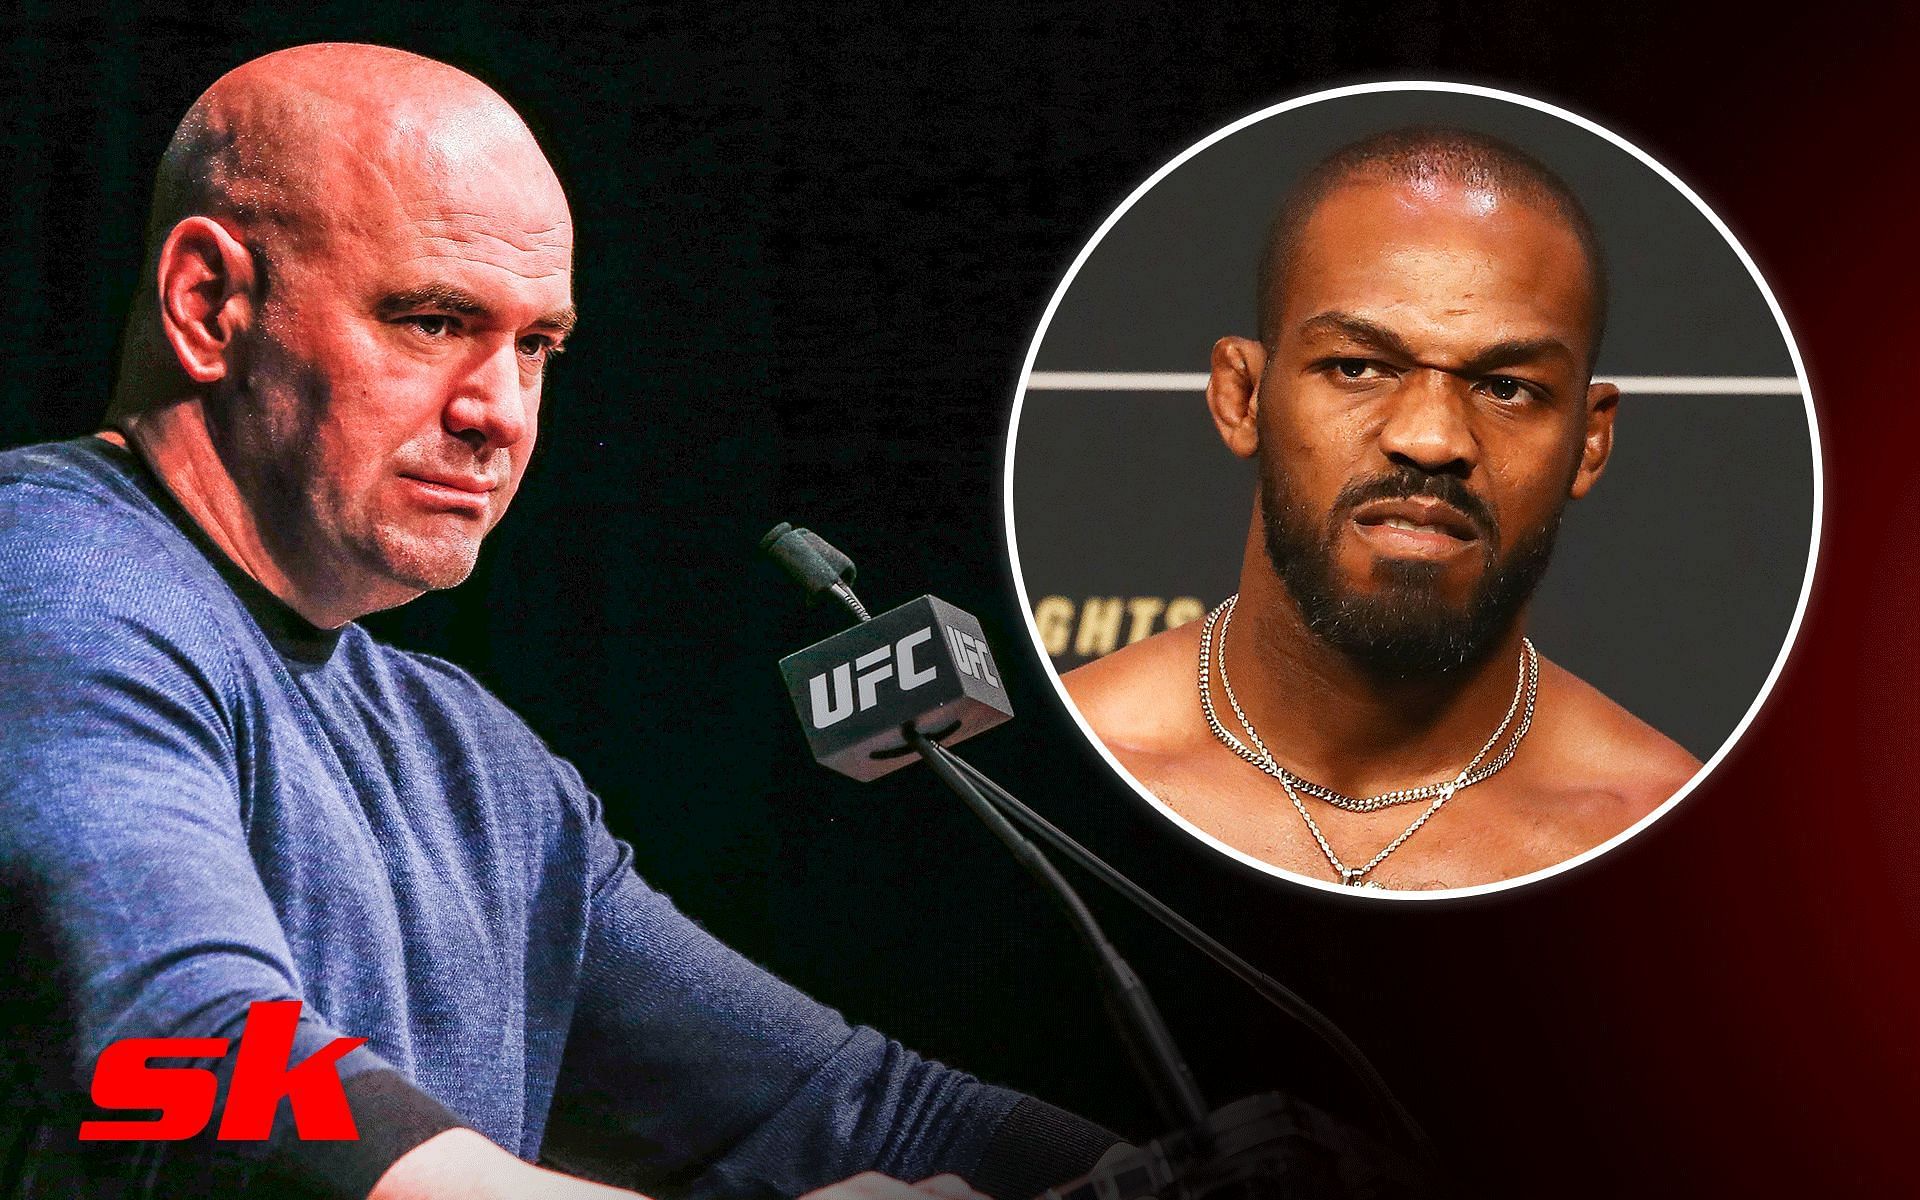 Dana White (left) blasts Jon Jones (right) in a recently revealed DM chain [Image courtesy Getty Images]